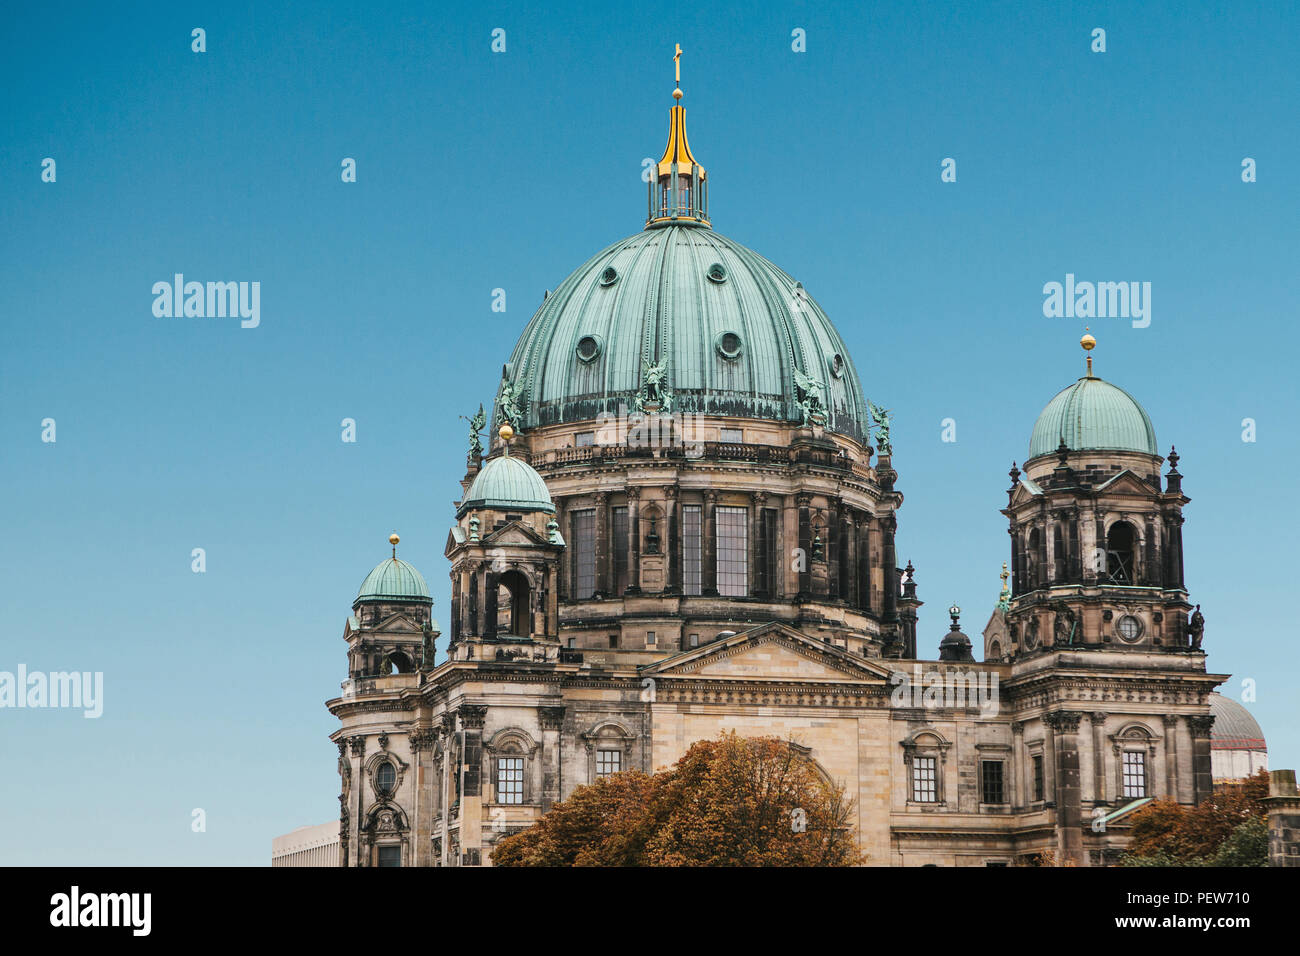 The Berlin Cathedral is called Berliner Dom against the blue sky. Beautiful old building in the style of neoclassicism and baroque with cross and sculptures. Berlin, Germany Stock Photo